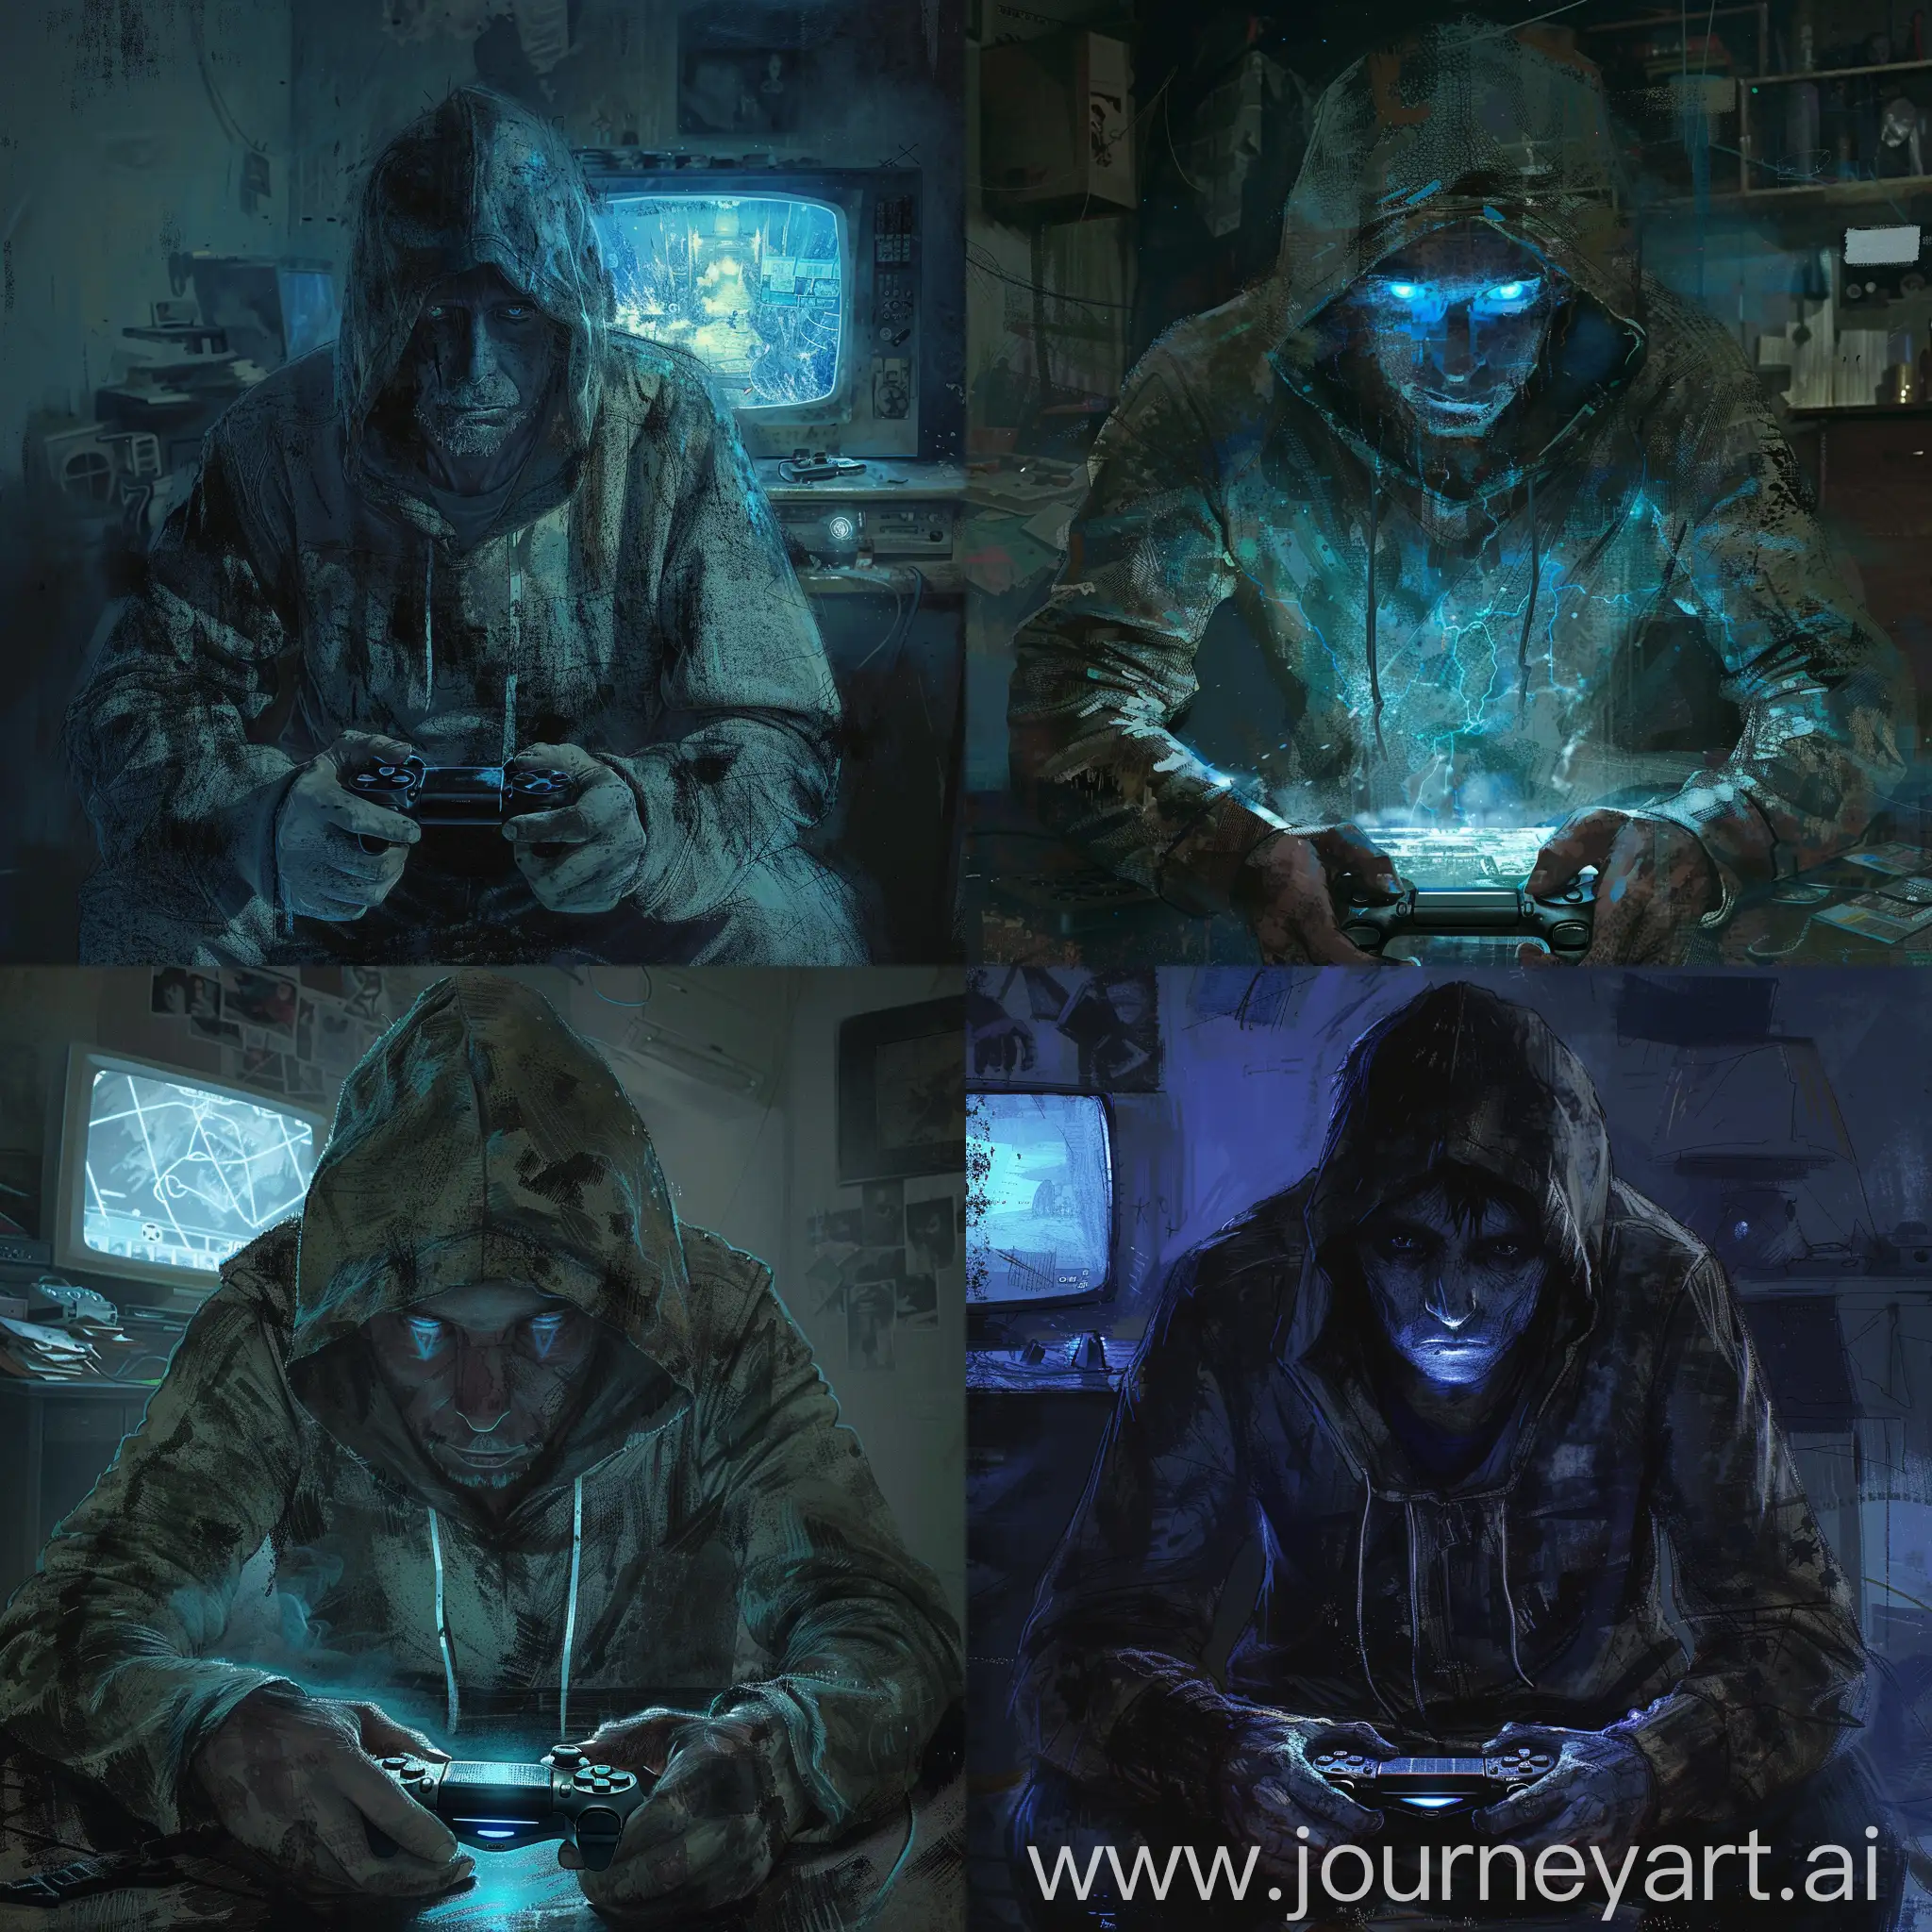 A brooding figure in a weathered hoodie engrossed in a game of Playstation in a dimly lit room. The man's features are shrouded in shadows, his eyes glowing with the reflection of the screen. The image, perhaps a digital painting, captures every minute detail of the scene - the worn controller in his hands, the glow of the television casting a blue light on his face, and the cluttered room around him. This striking image immerses viewers in the intimate moment, highlighting the intensity of the gamer's focus and the isolation of the setting.